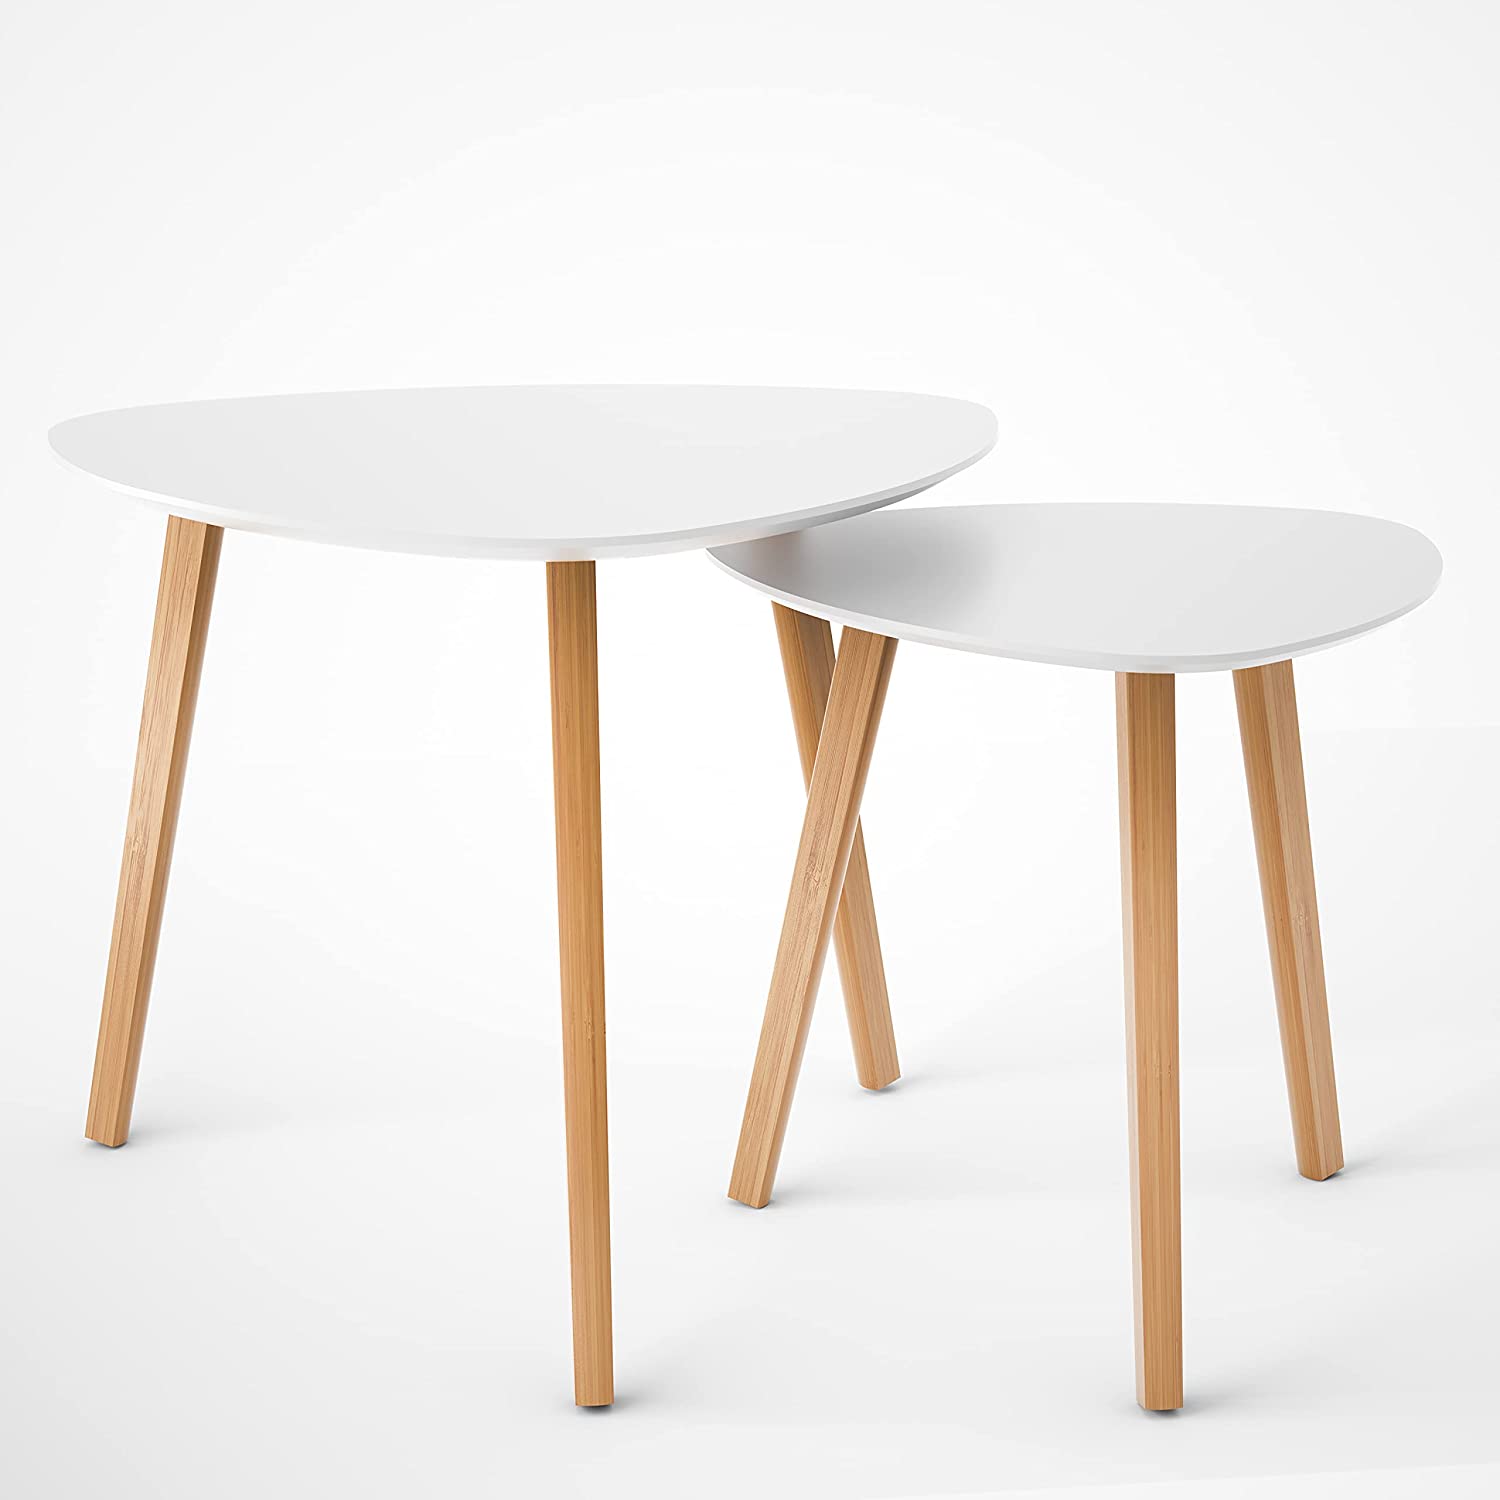 Nest of Tables: Modern Minimalist Side Table for Living Room